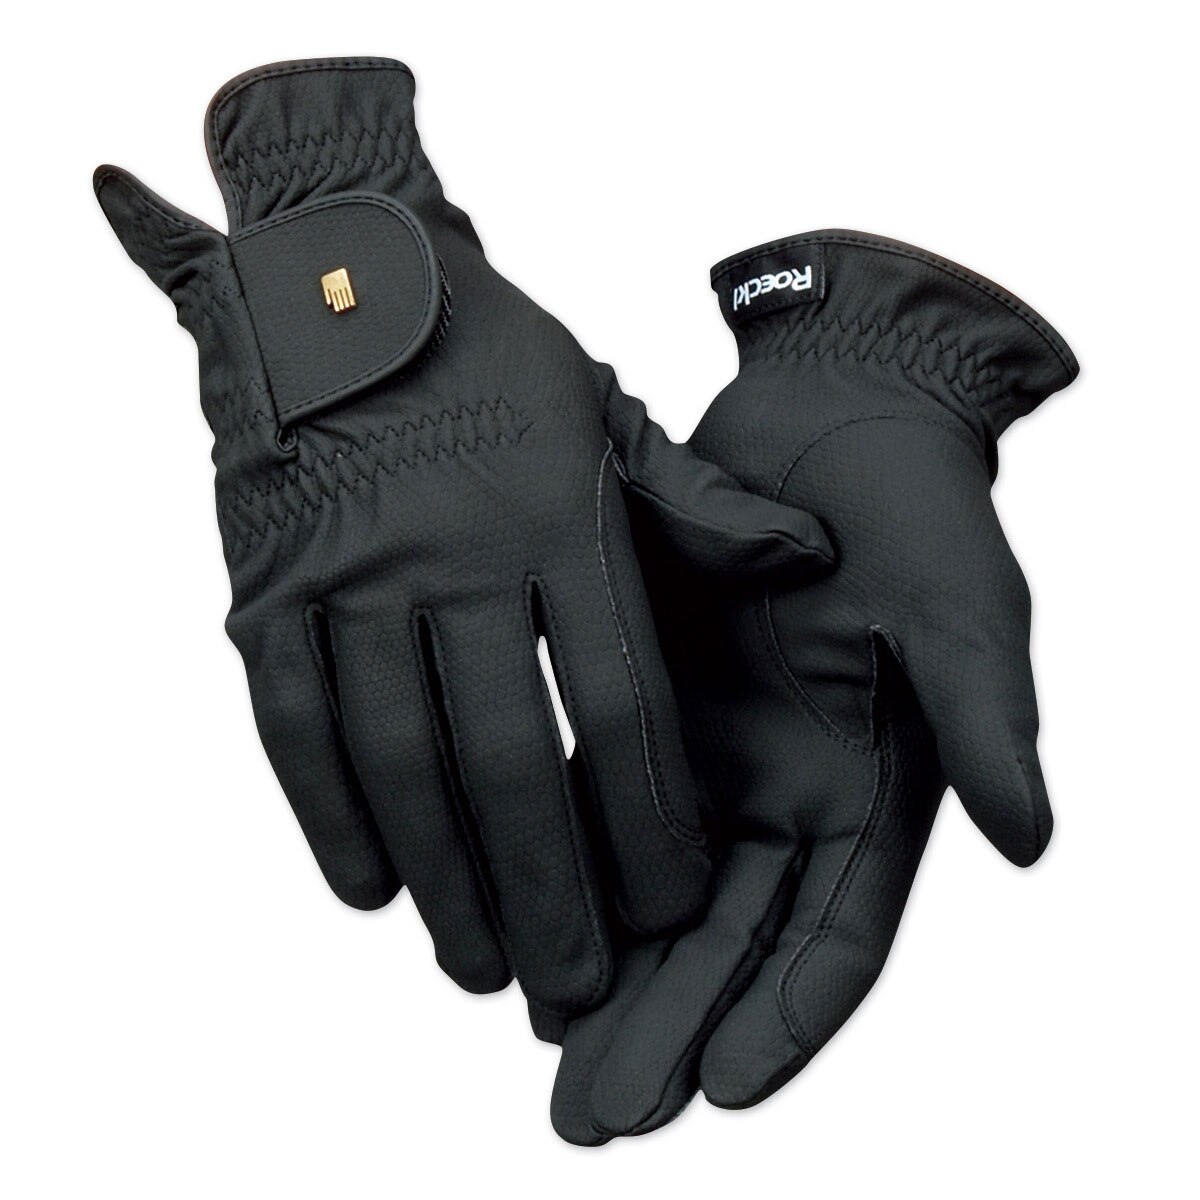 Roeckl Lisboa Ladies' Crystal Riding Gloves with Roeck-Grip for Reins 